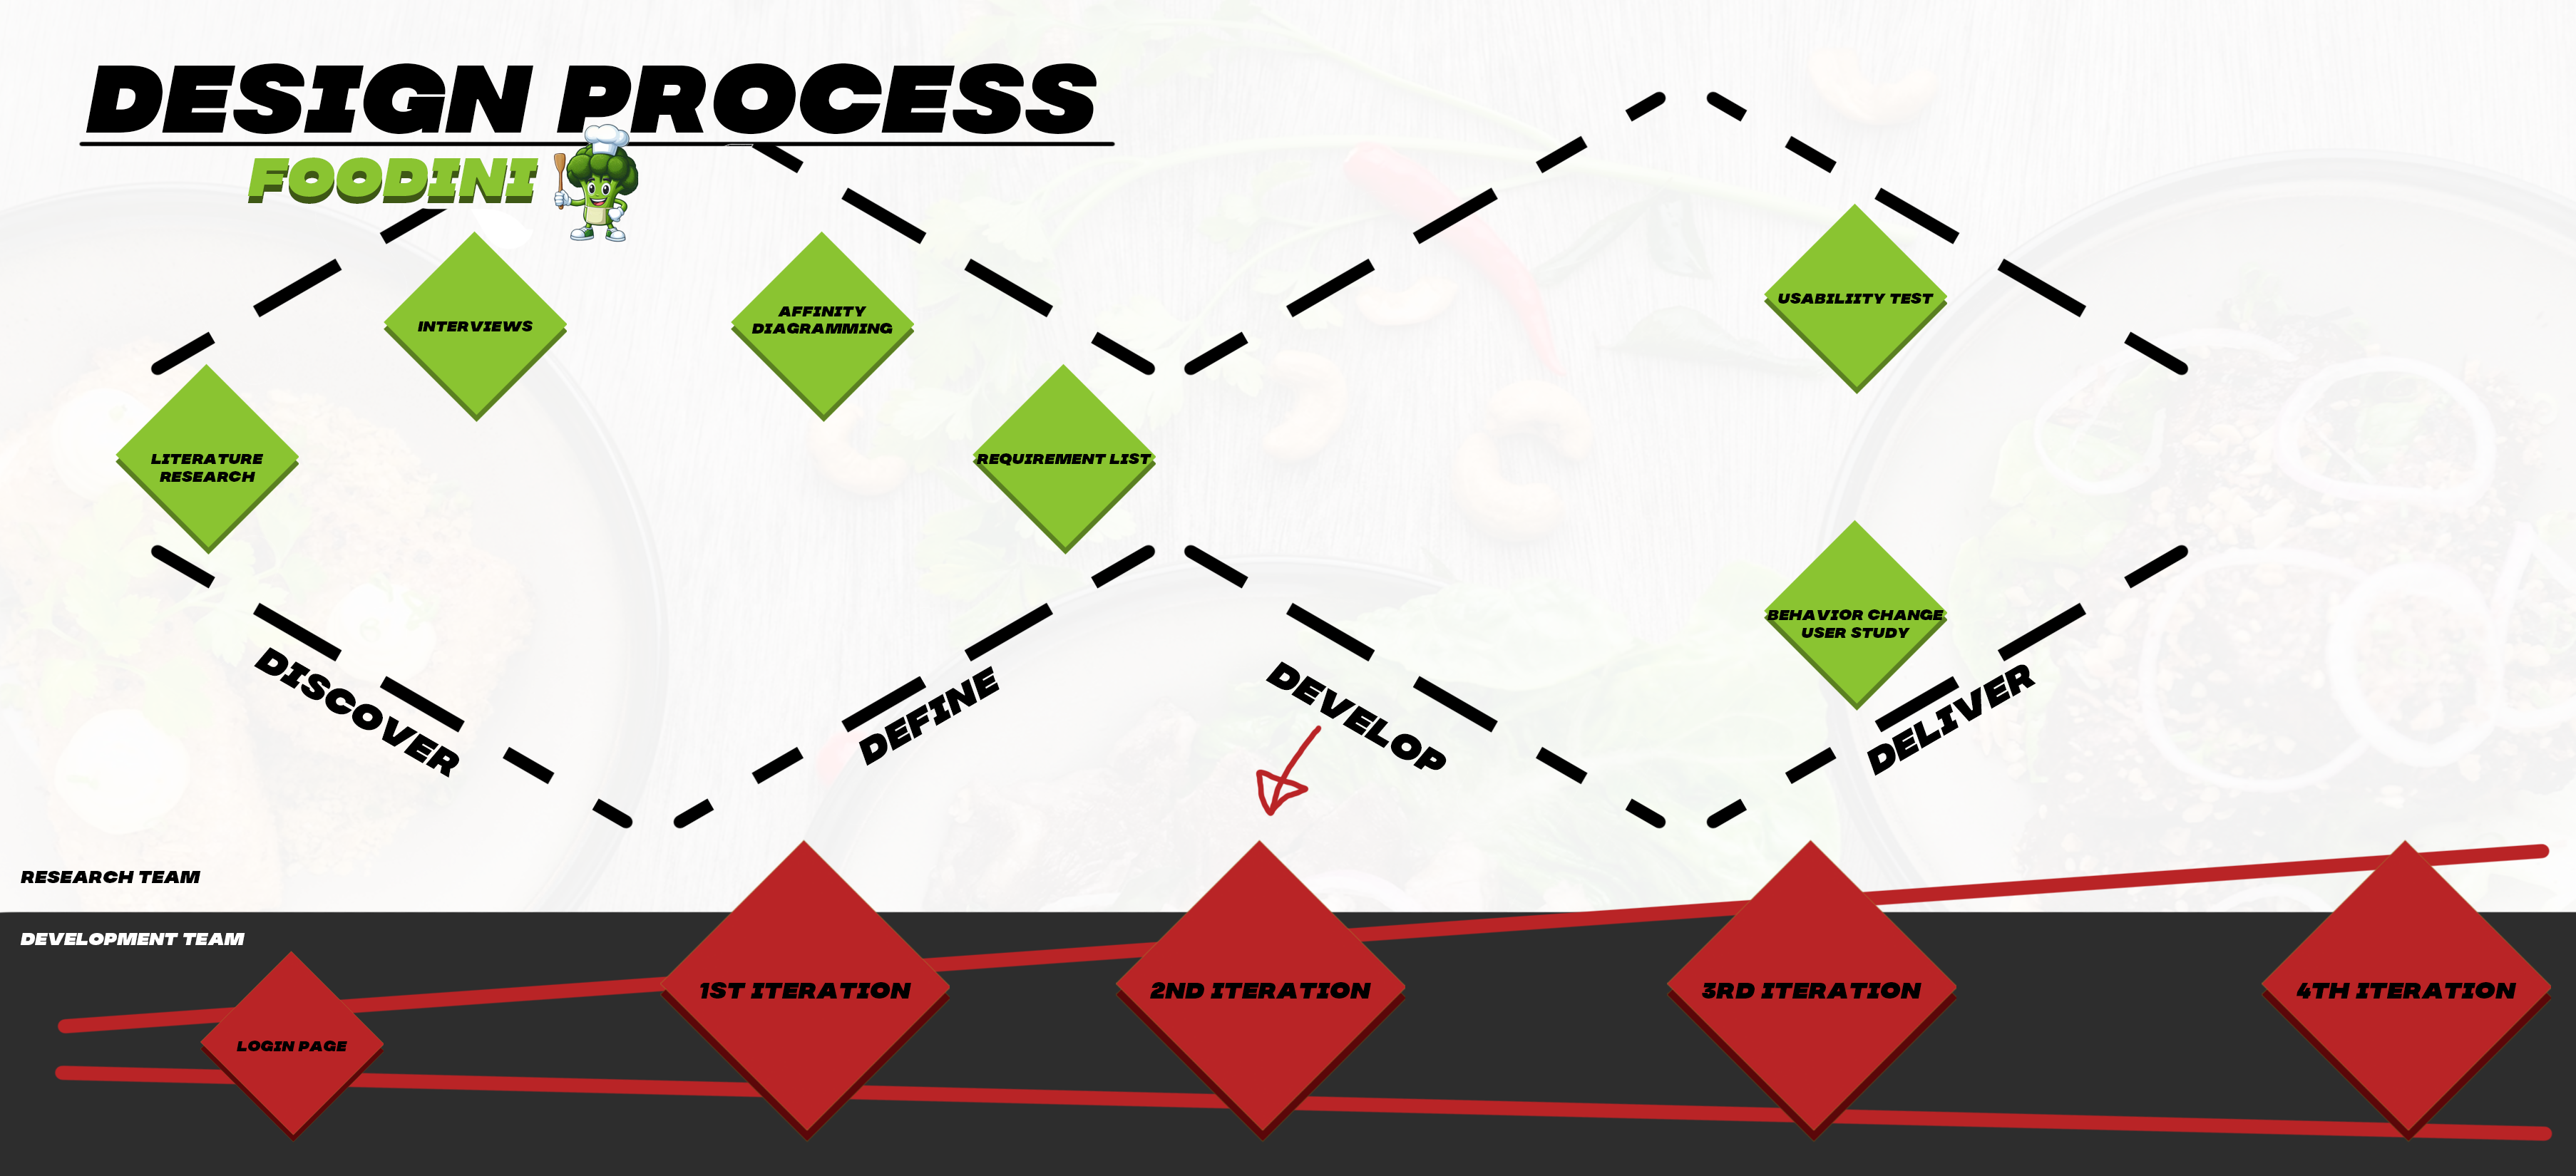 File:Our Version of the Double Diamond Design Process.png